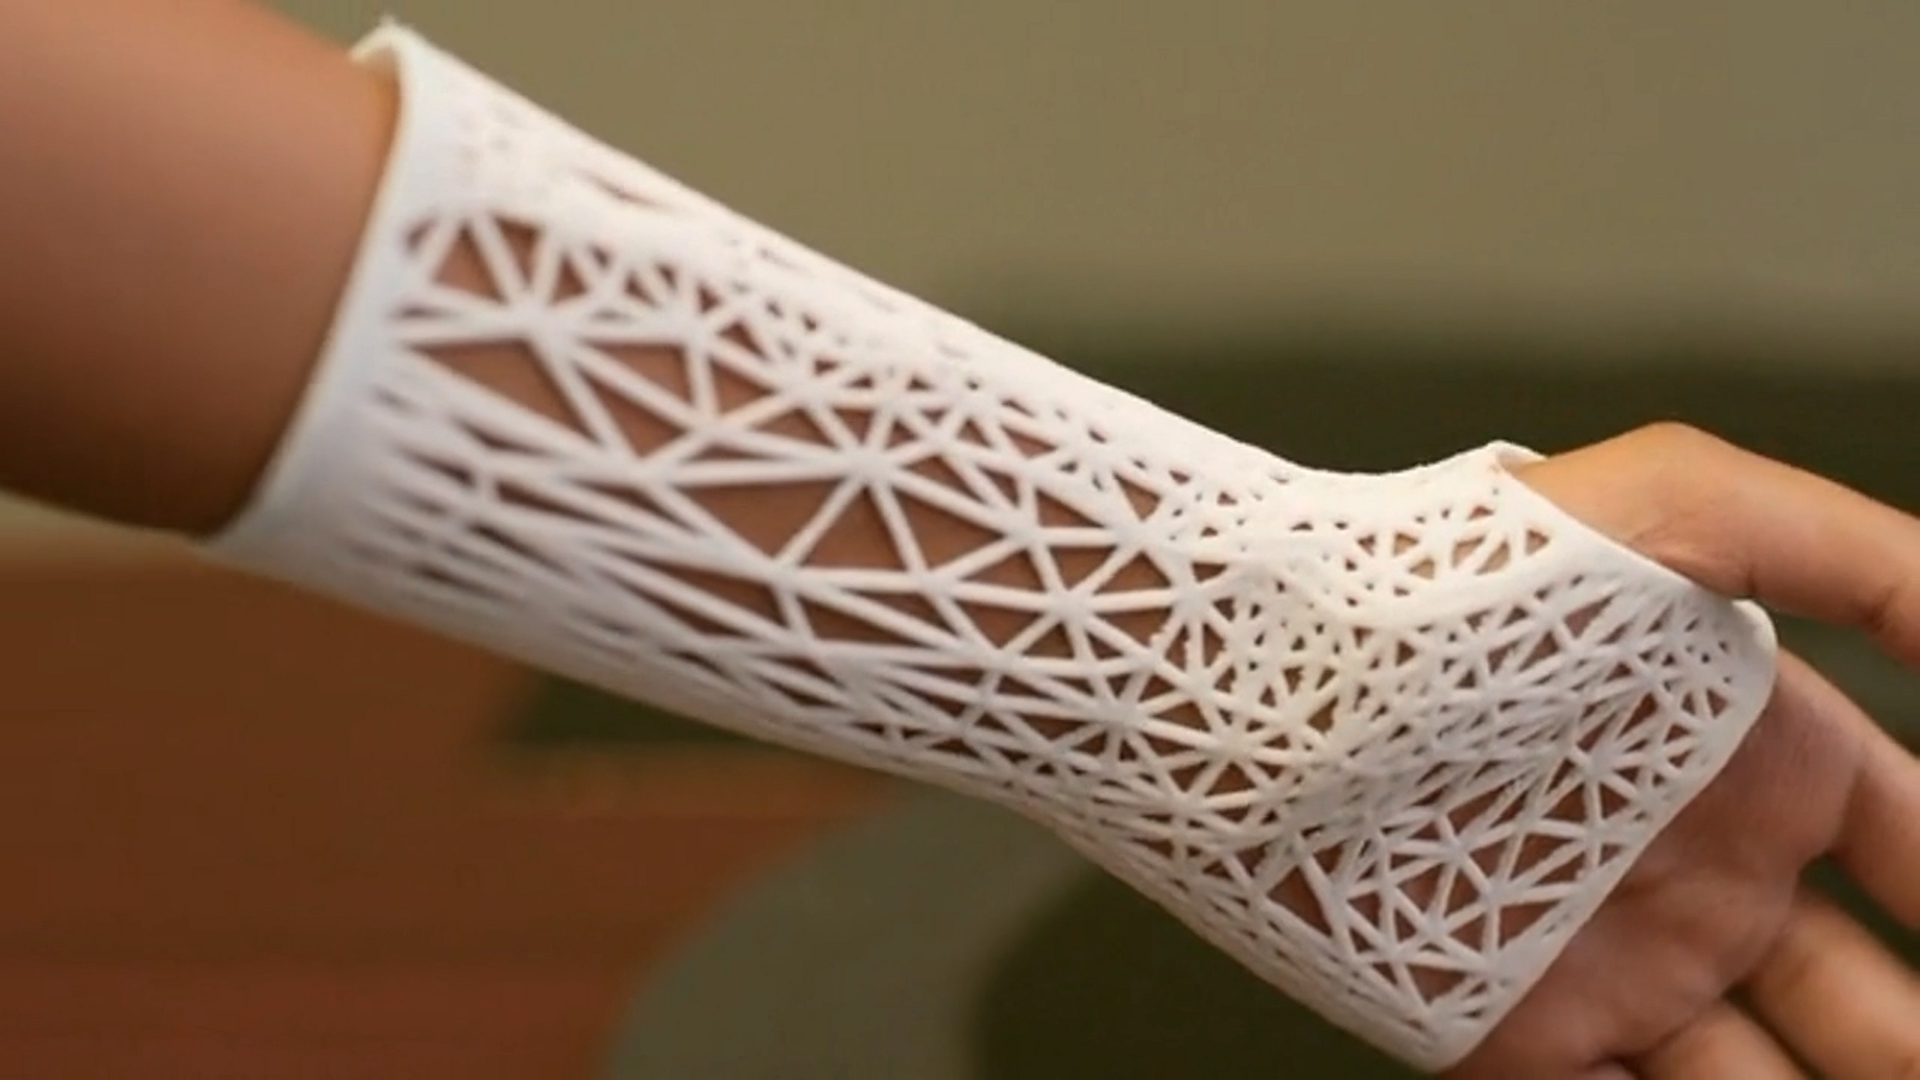 PrinterPrezz Partners with UCSF to Develop New 3D Printed Medical Devices